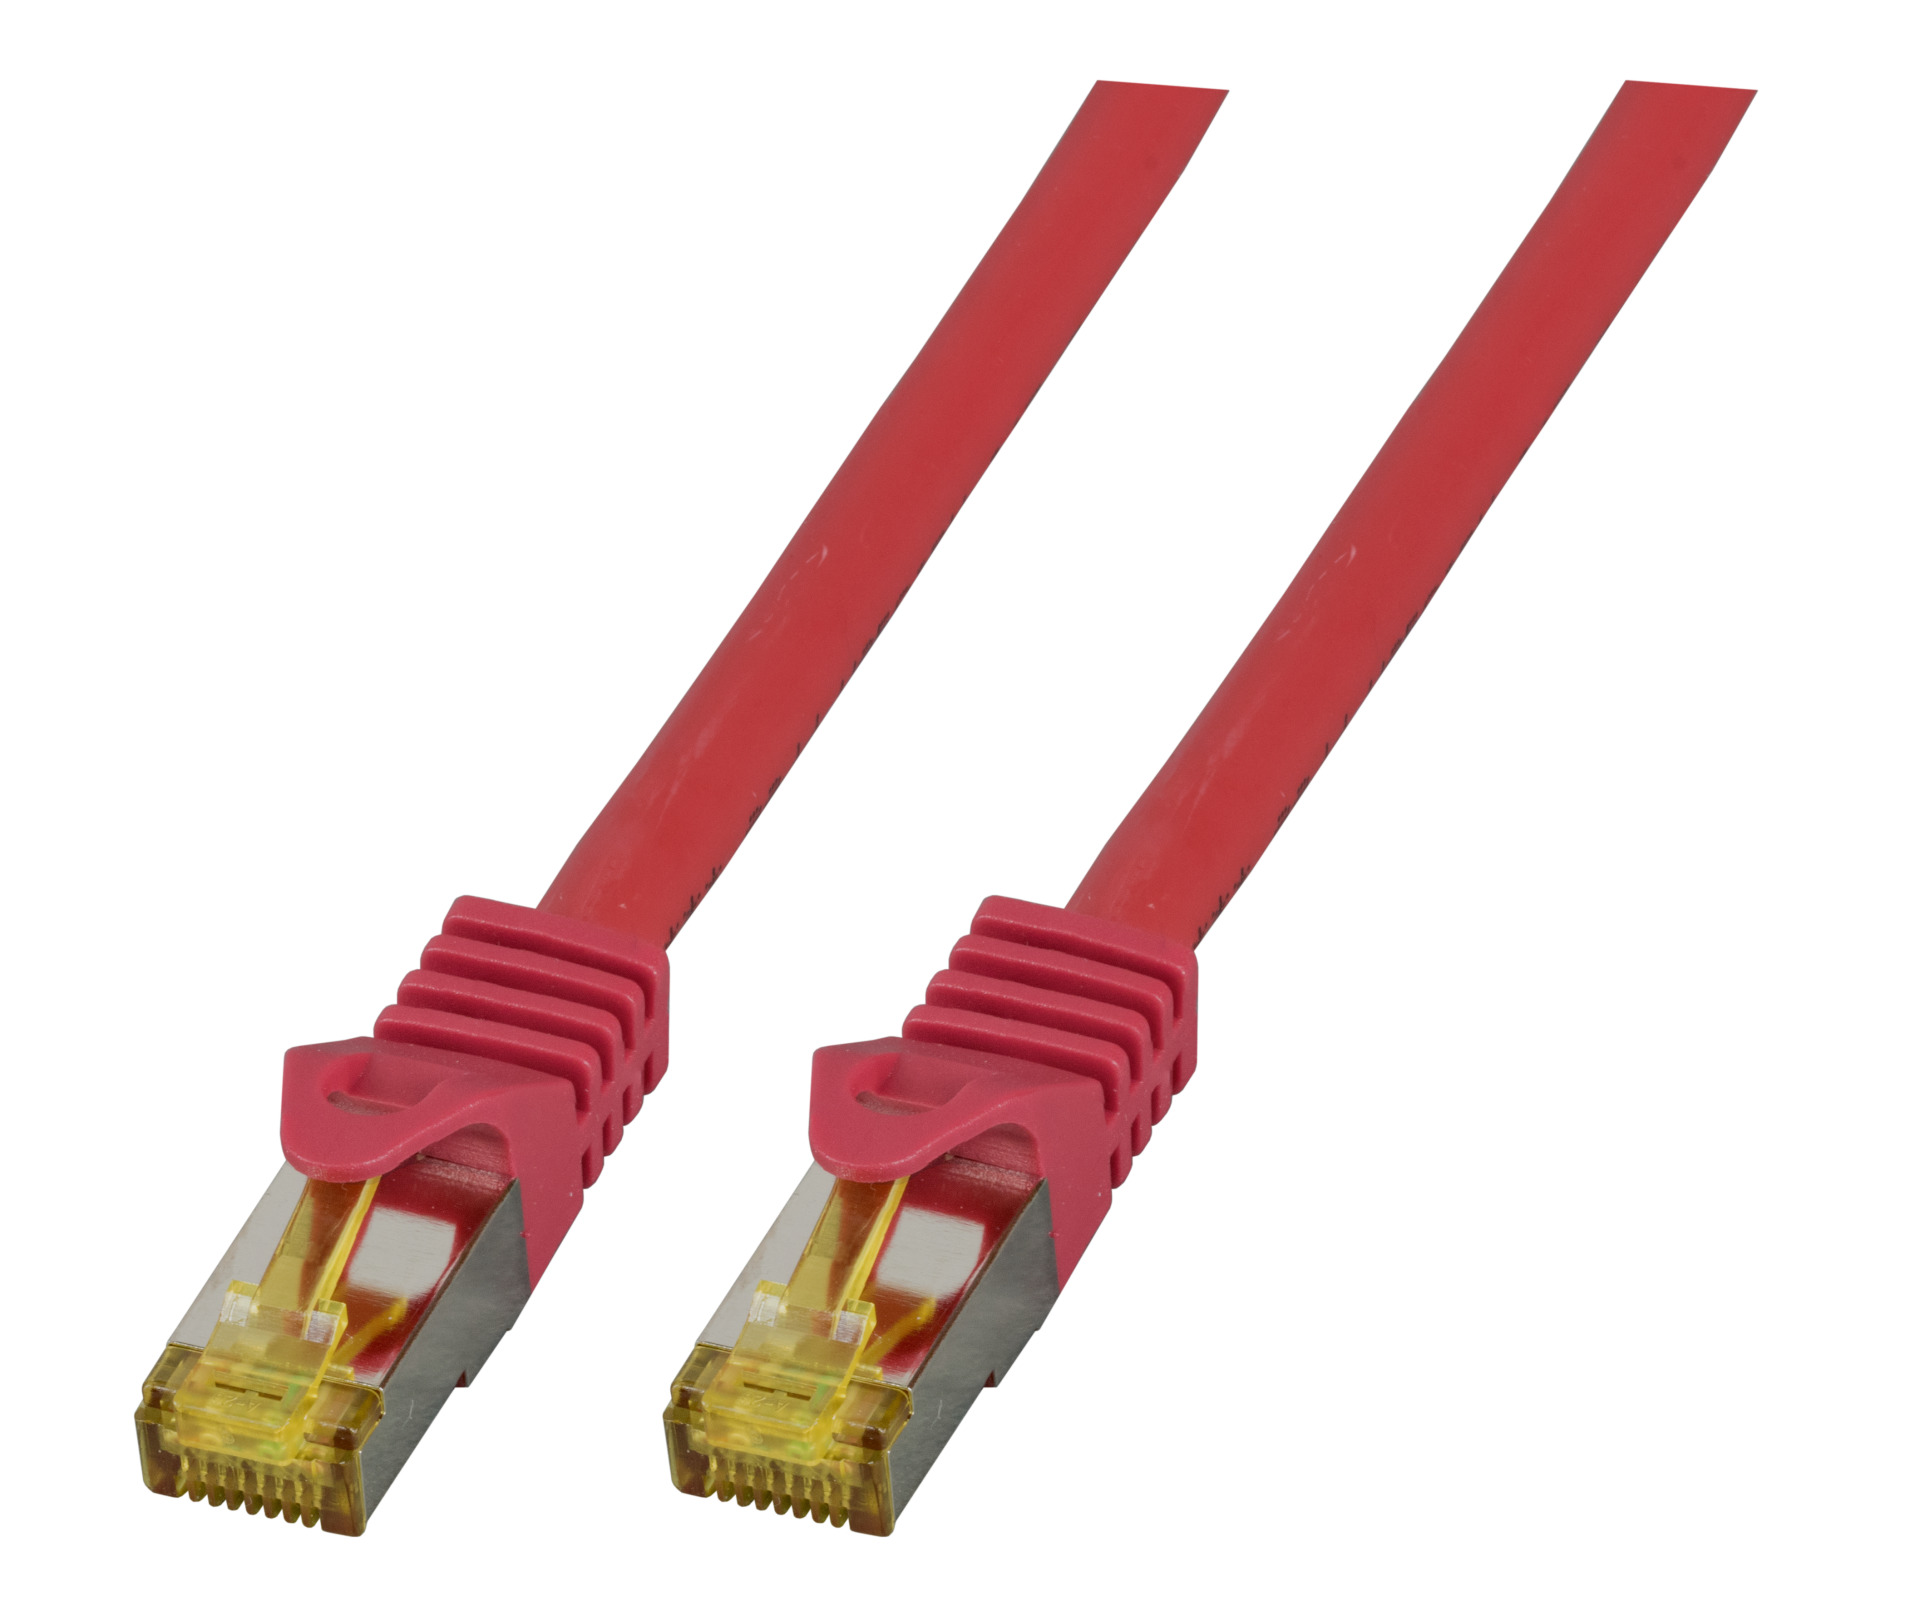 RJ45 Patch cable S/FTP, Cat.6A, LSZH, Cat.7 Raw cable, 1m, red